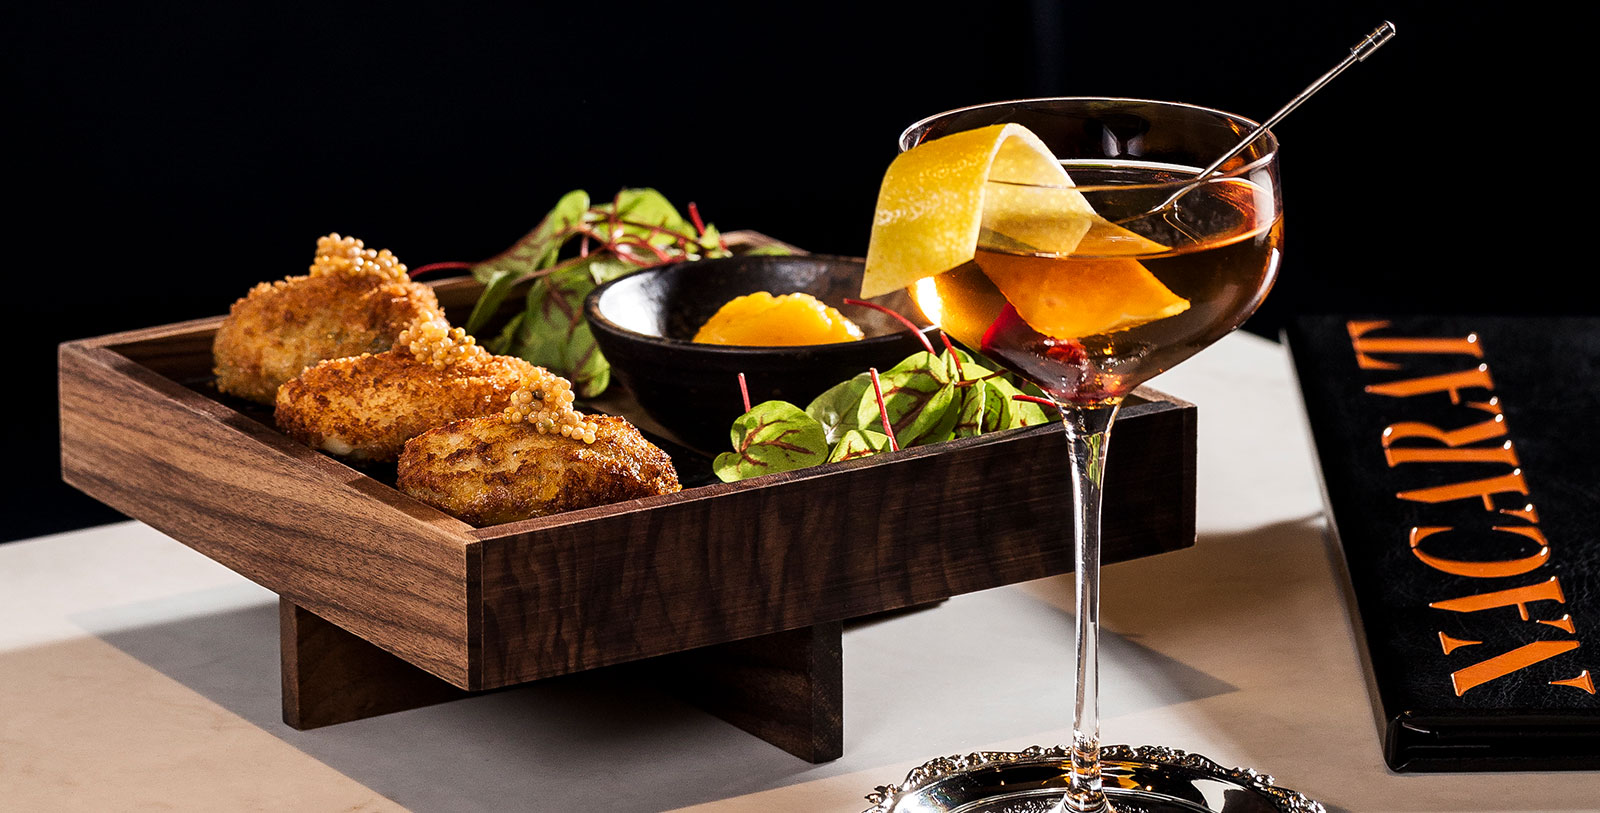 Taste the Montréal-style cuisine and sip some delicious cocktails at Bar Nacarat.